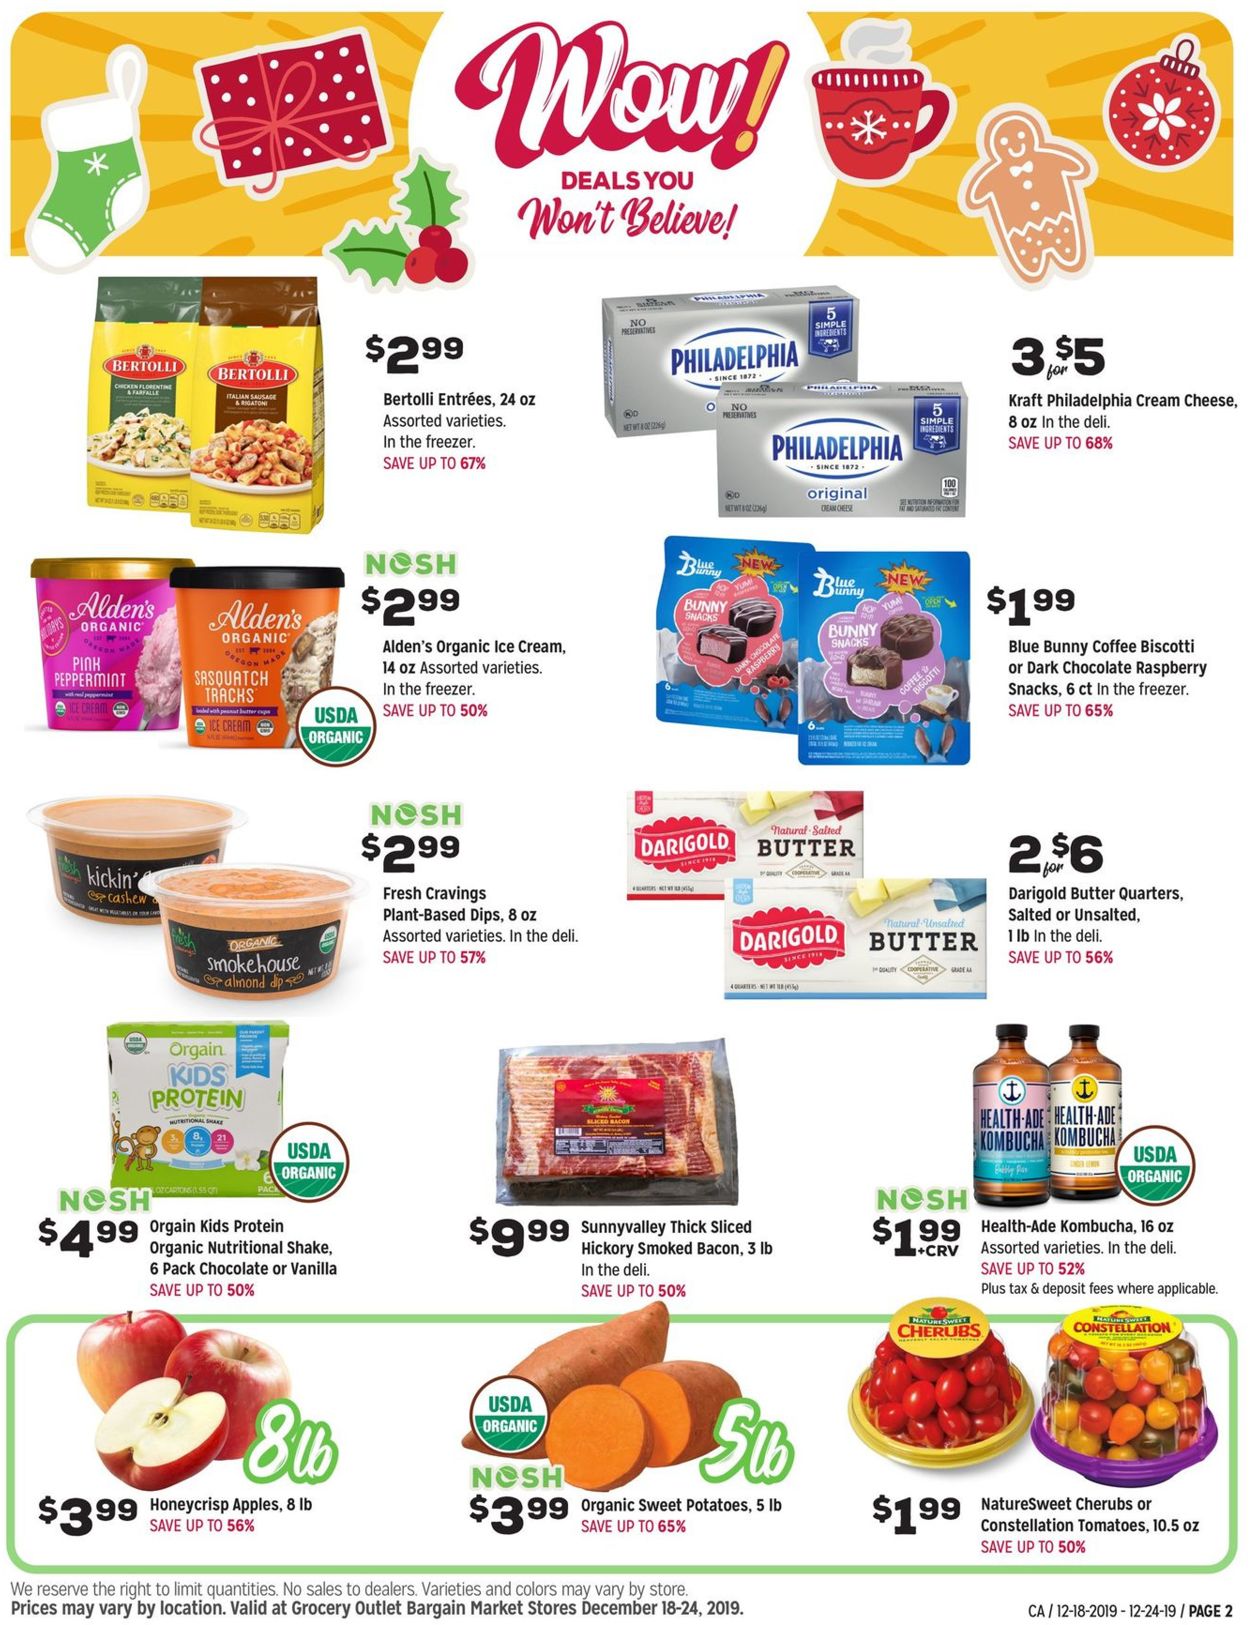 Catalogue Grocery Outlet - Holiday Ad 2019 from 12/18/2019